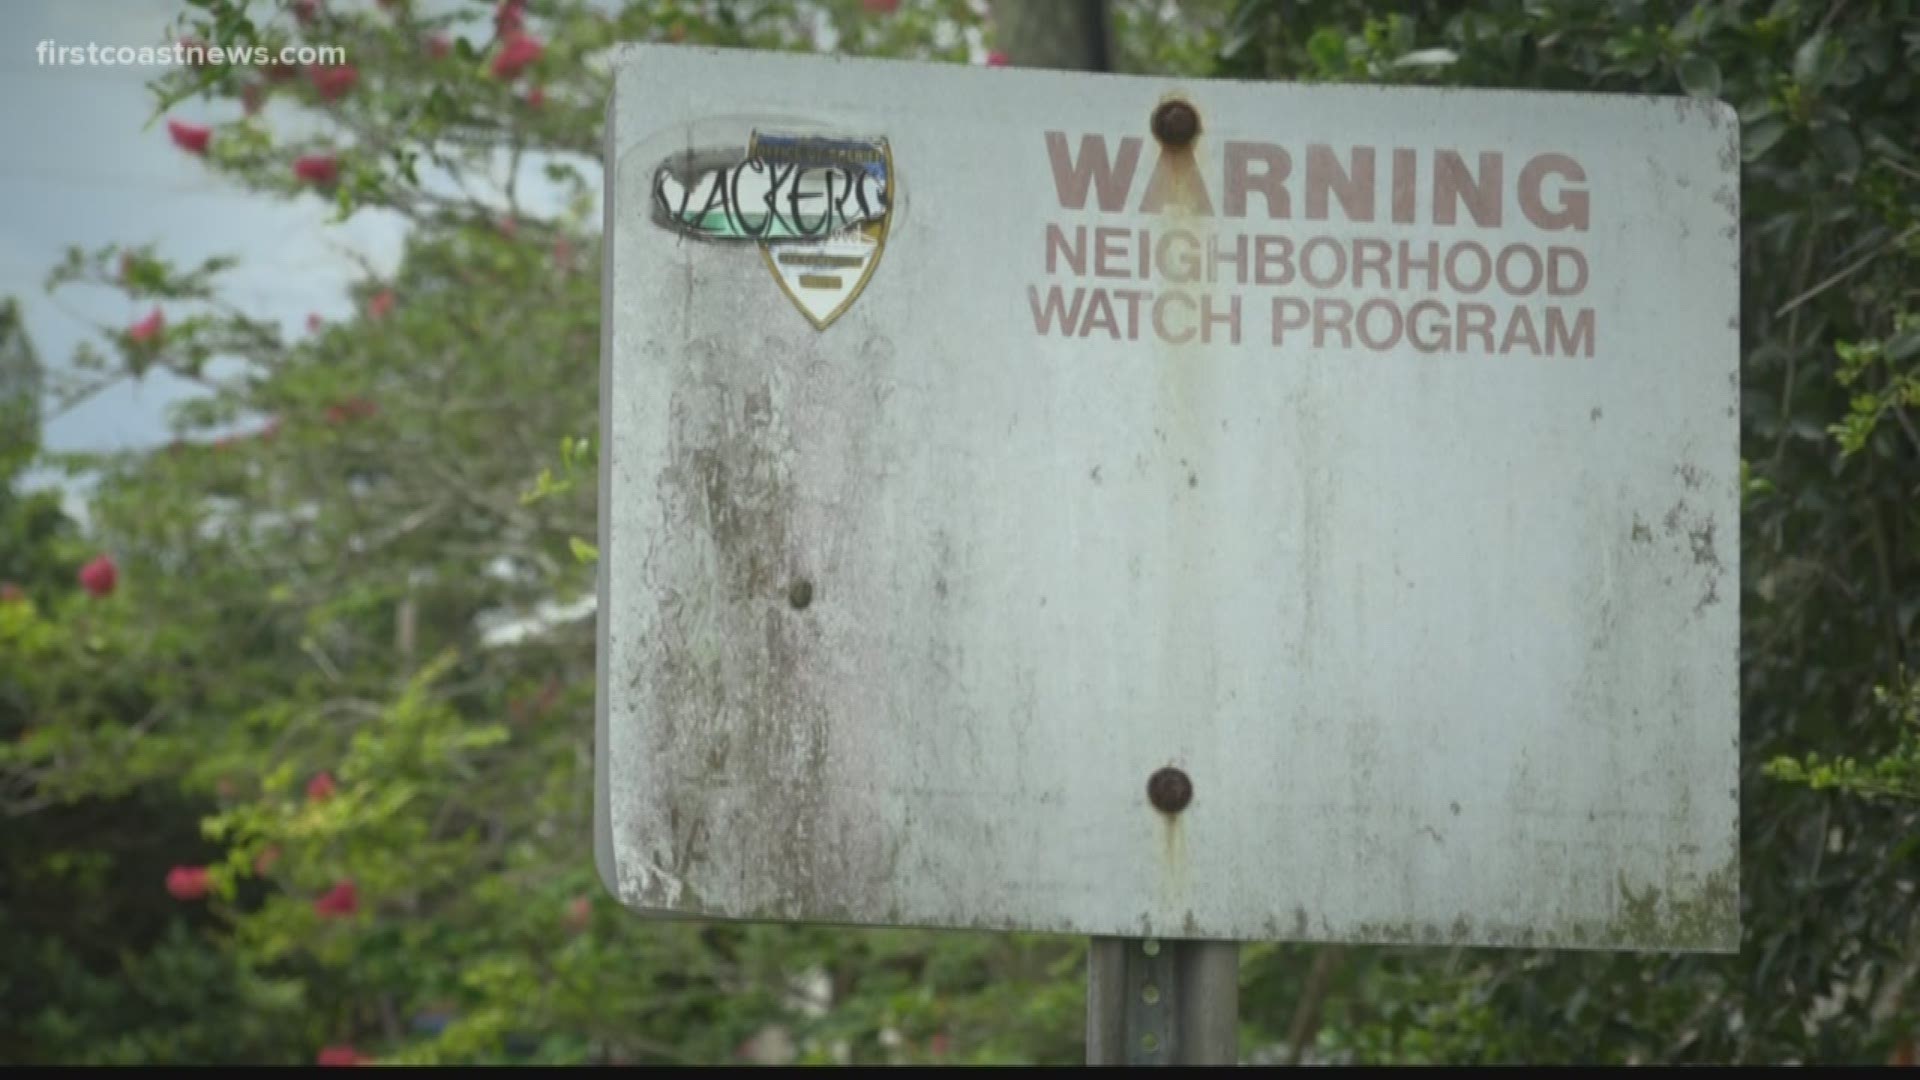 A Jacksonville Beach man is looking to fight crime in the area by starting a formal neighborhood watch program.